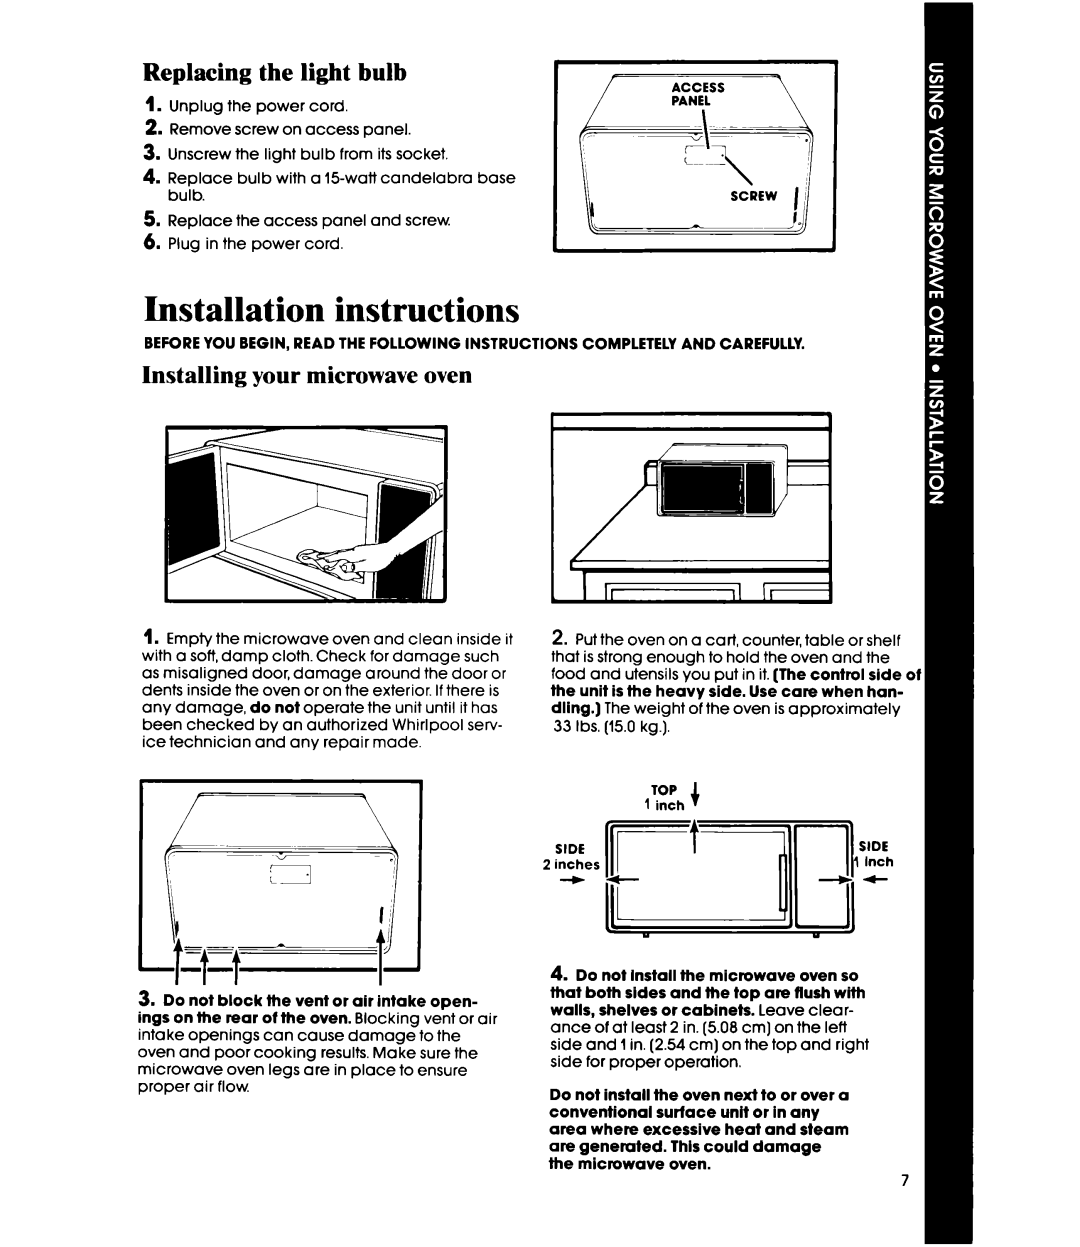 Whirlpool MW1200XP, MW120EXP manual Installation instructions, Replacing the light bulb, Installing your microwave oven 